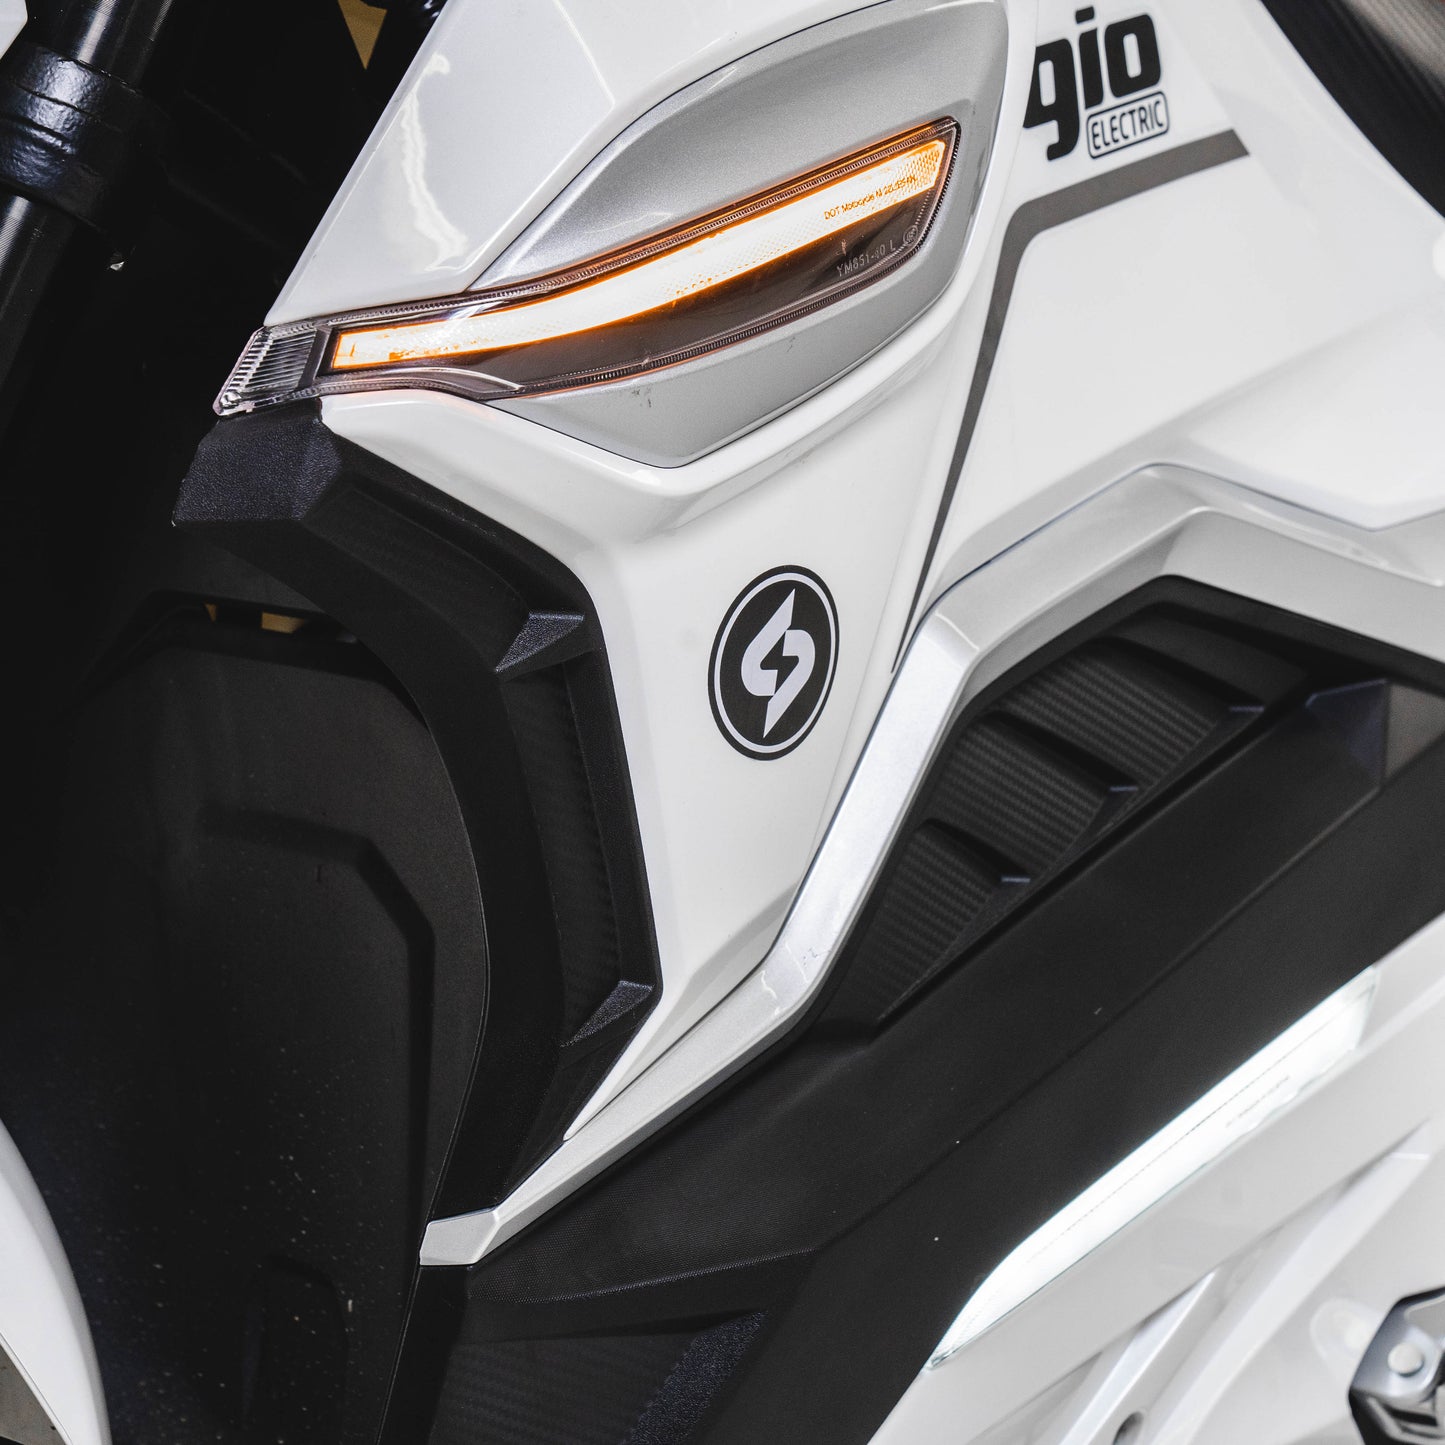 GIO Electric G2000 2000w Electric Motorcycle